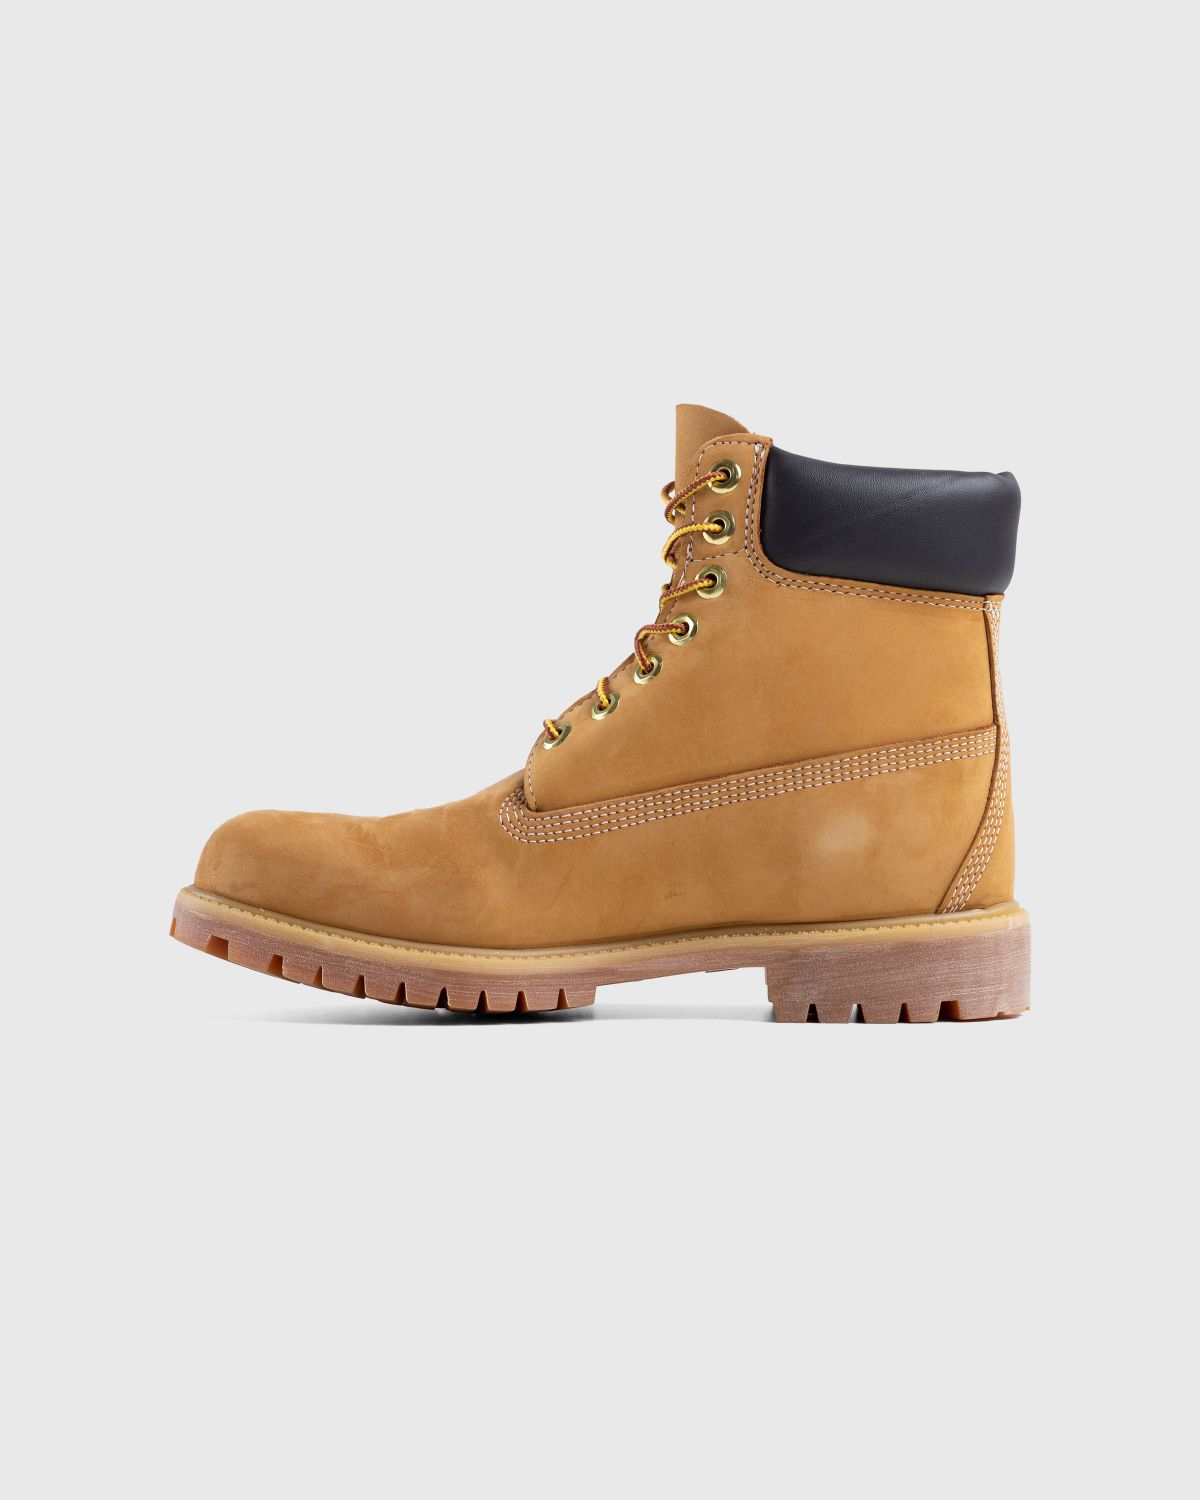 Timberland – 6 Inch Premium Boot Yellow - Laced Up Boots - Yellow - Image 5